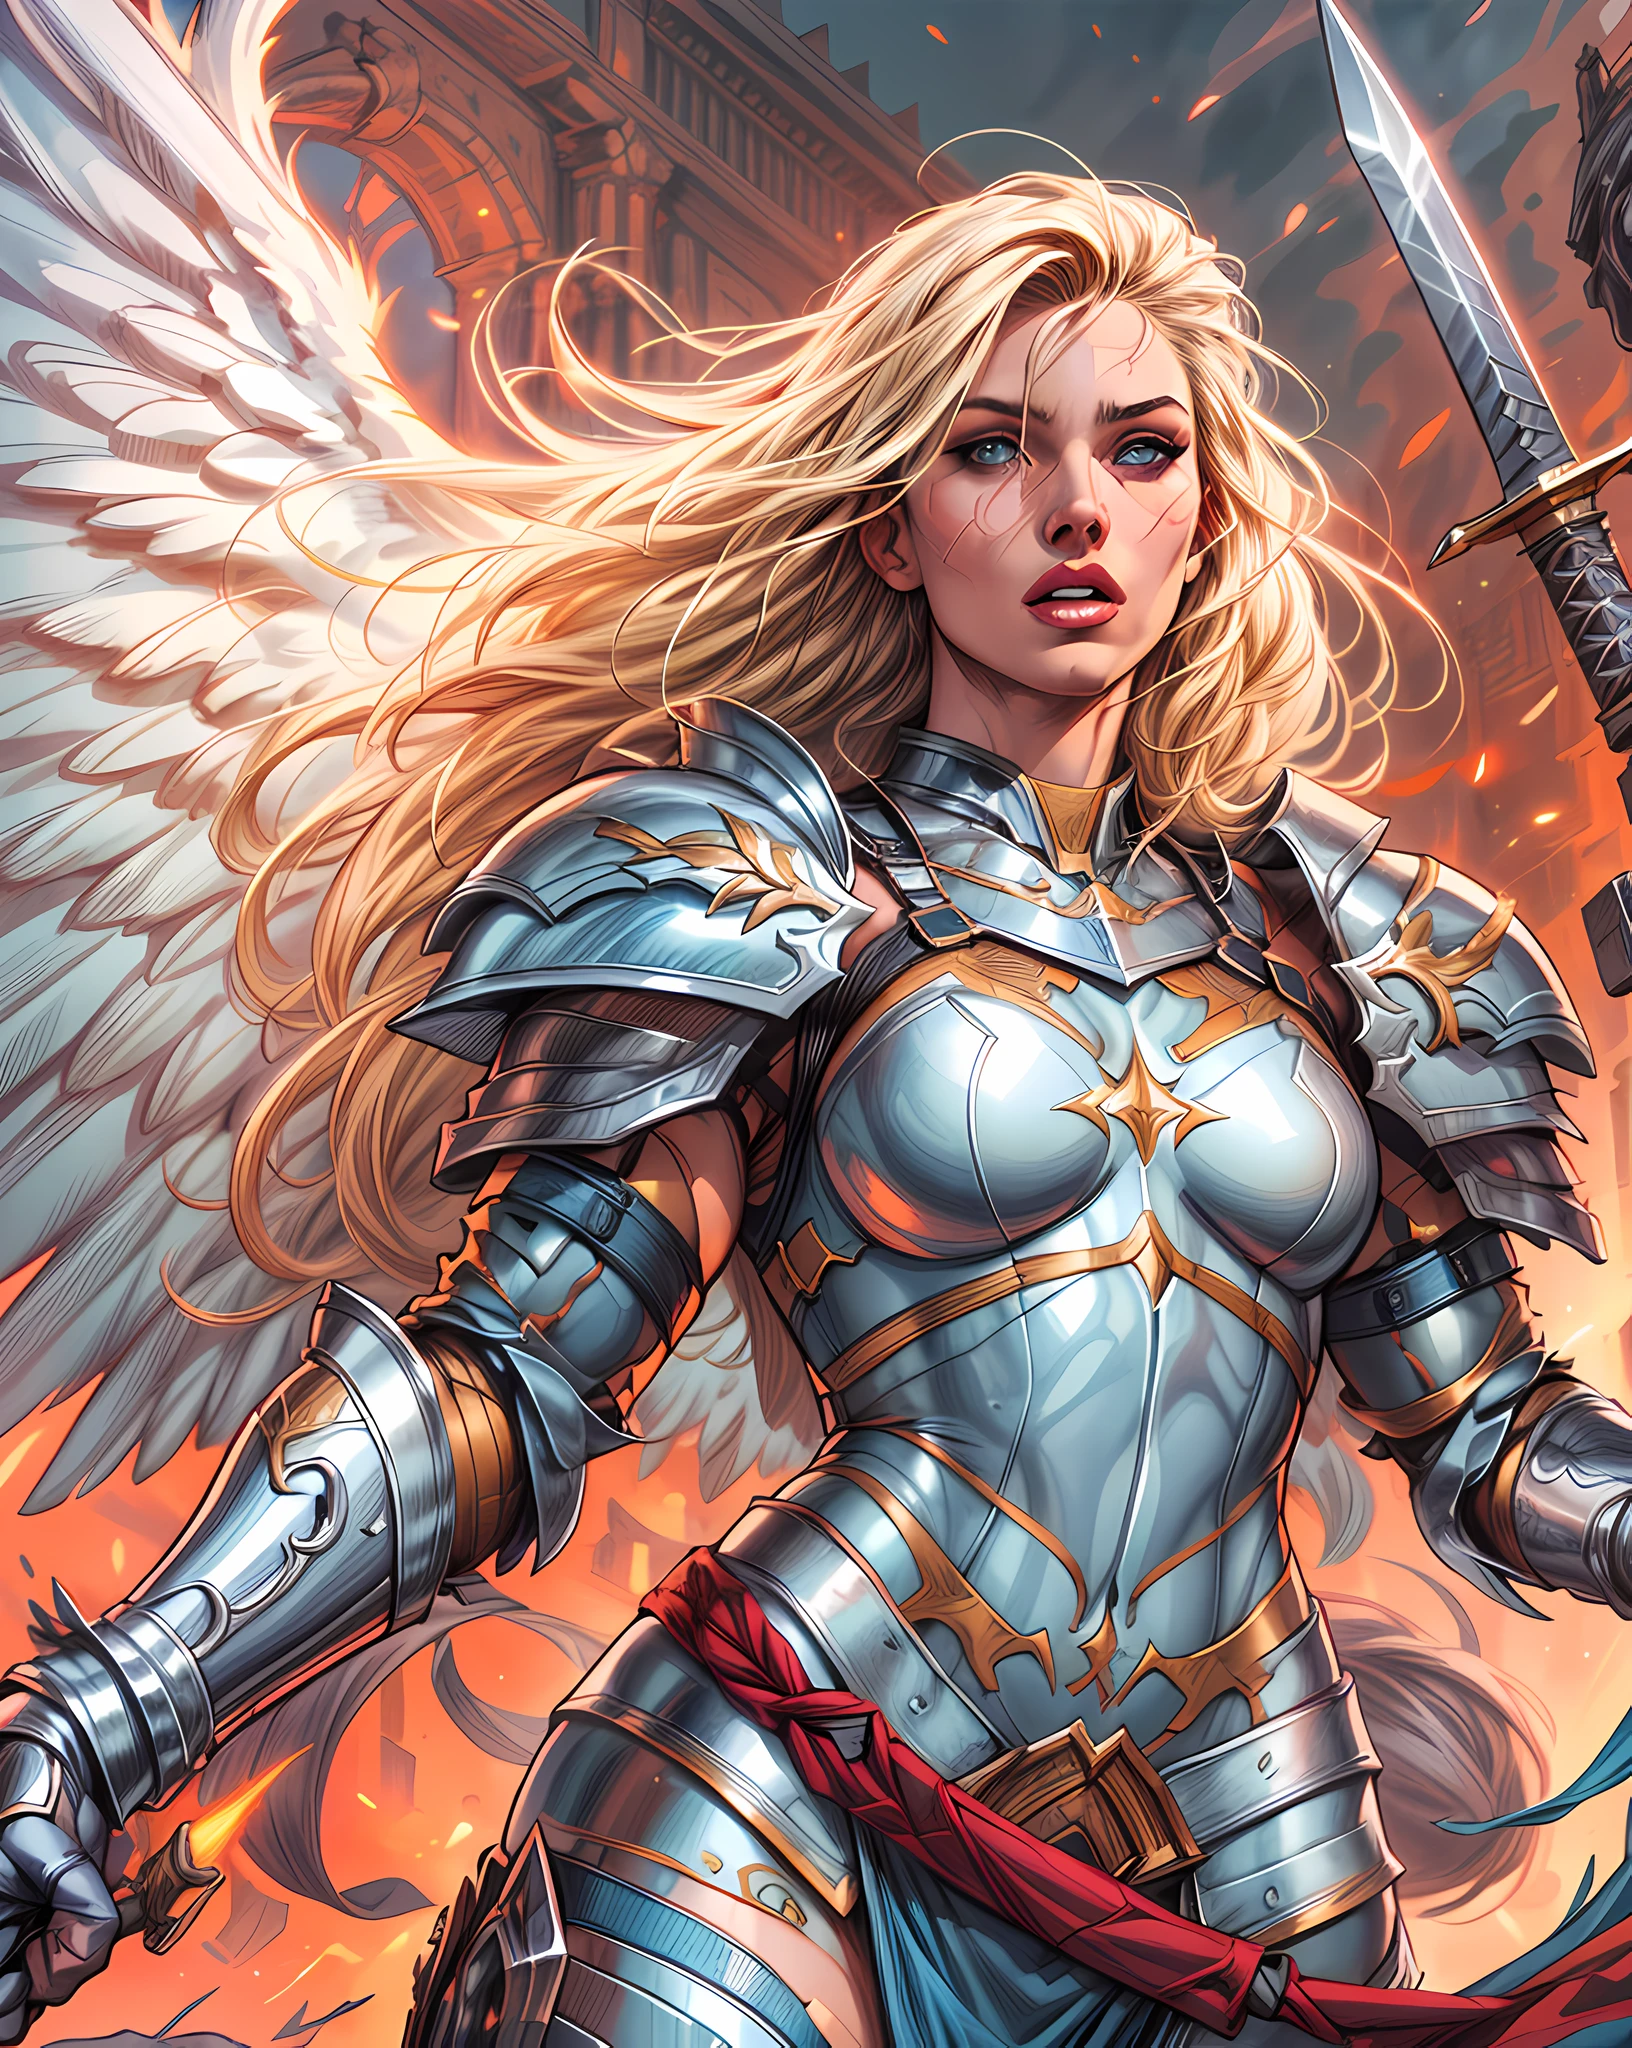 (Comic book cover art: 1.5), an female archangel prepared for battle, an extremally beautiful warrior angel, ultra feminine, long hair, blond hair, braided hair, wearing divine heavy armor, (white armor: 1.2), (angel wings: 1.2) spread, aremed with fantasysword sword, sword covered with blue fire, 16k, RAW, ultra wide shot, photorealism, depth of field, hyper realistic, 2.5 rendering, comic cover